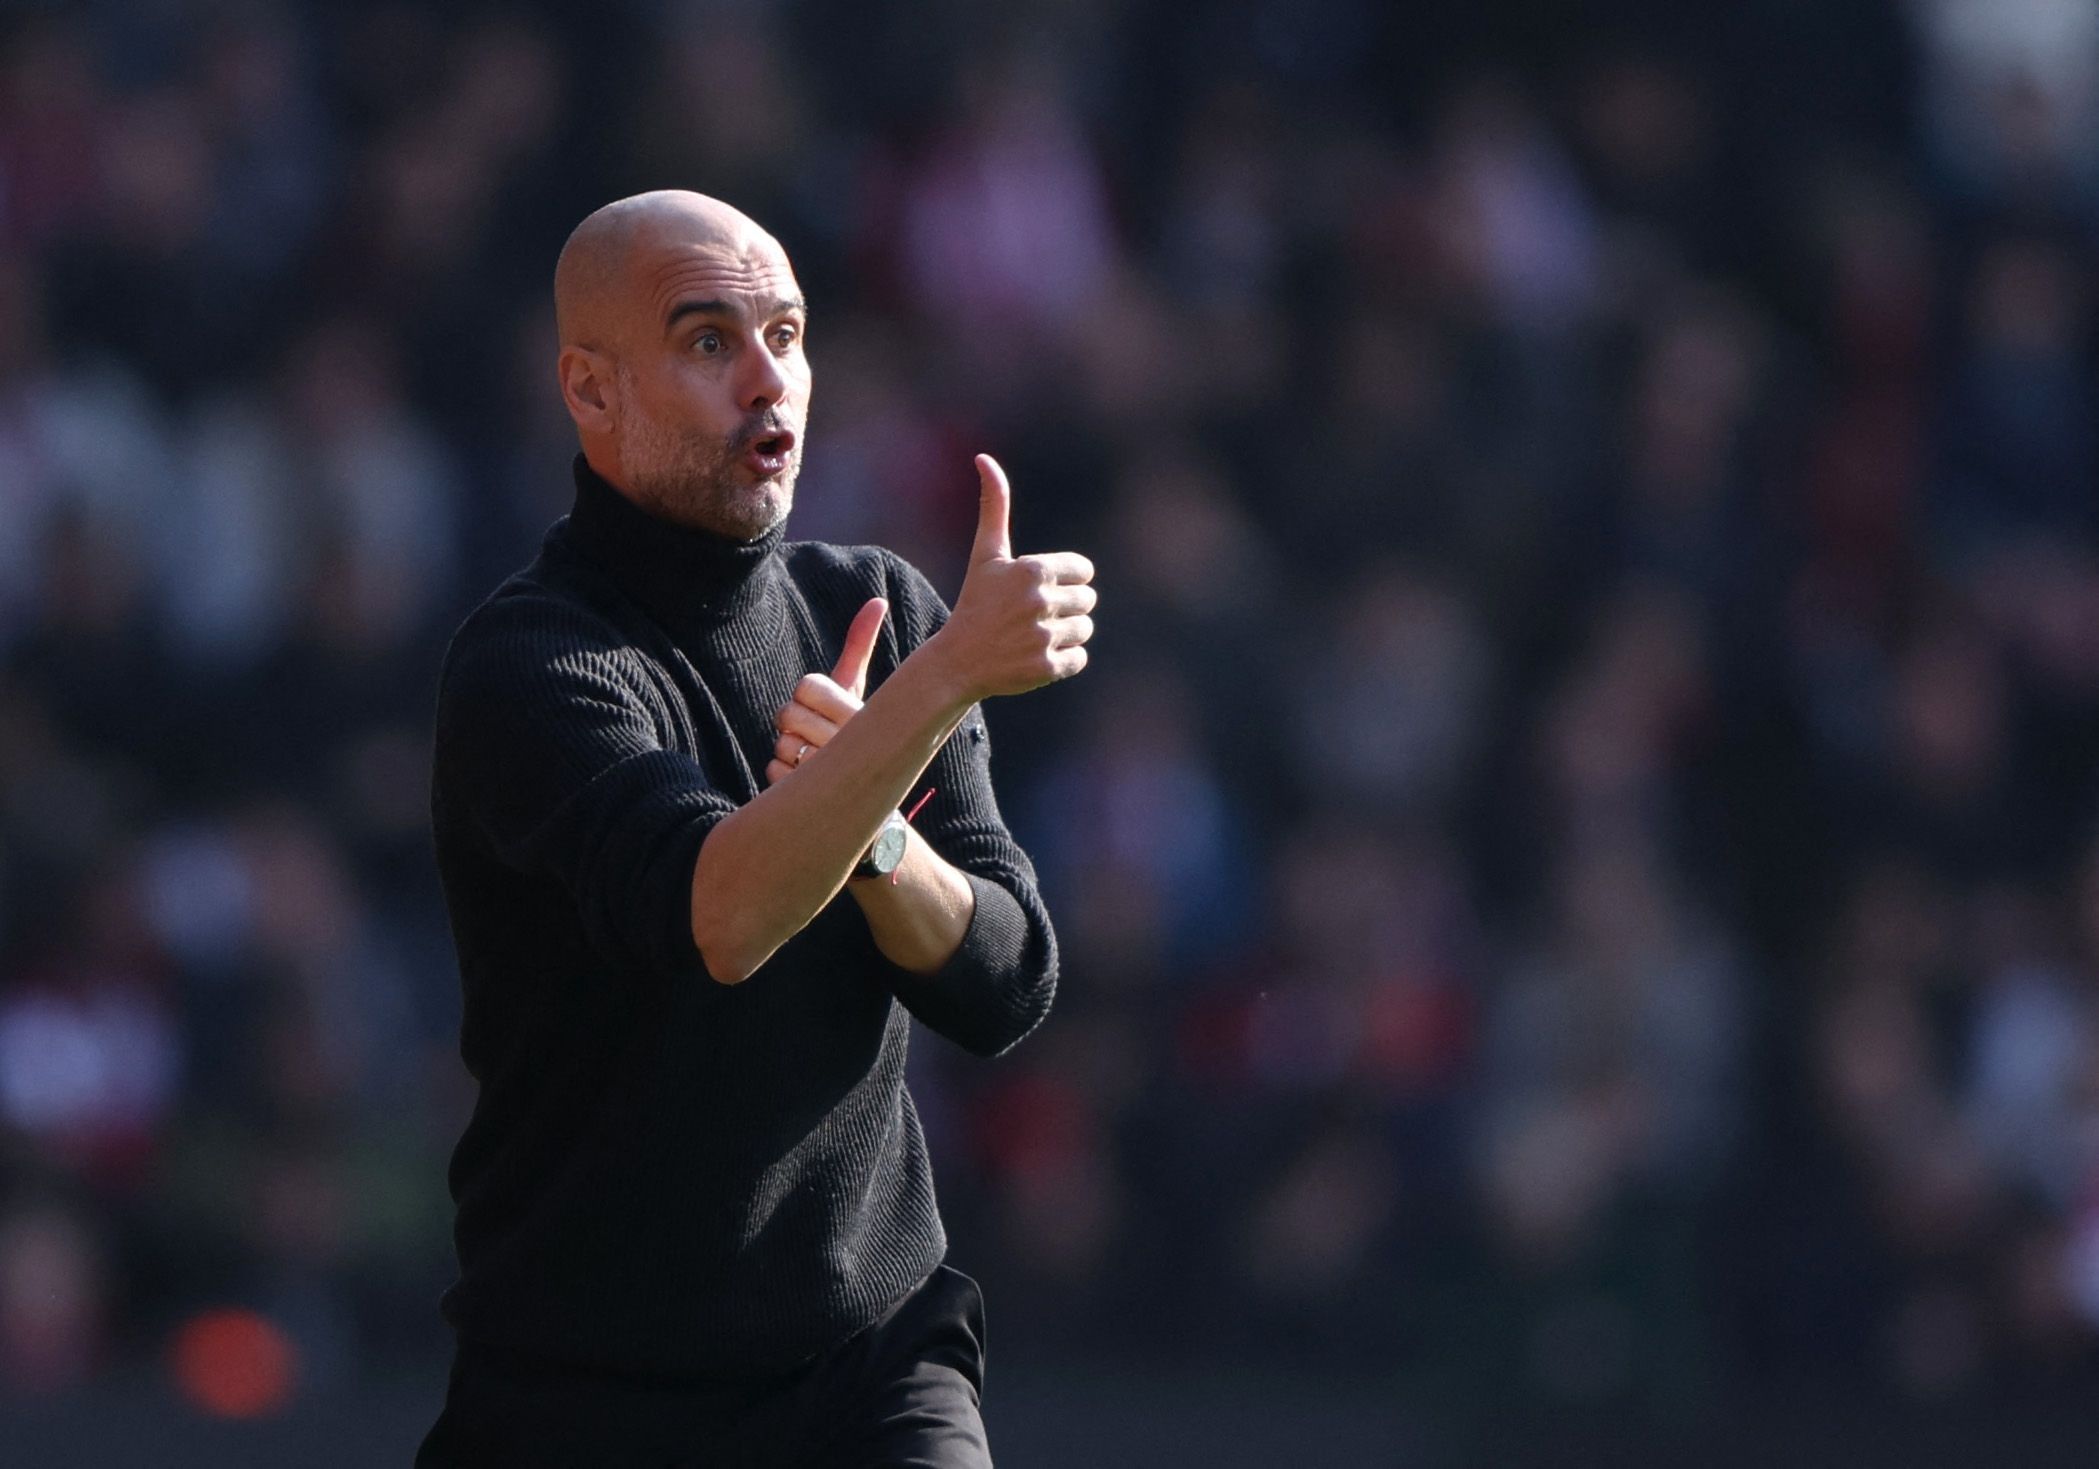 Soccer Football - FA Cup Quarter Final - Southampton v Manchester City - St Mary's Stadium, Southampton, Britain - March 20, 2022 Manchester City manager Pep Guardiola reacts REUTERS/Ian Walton